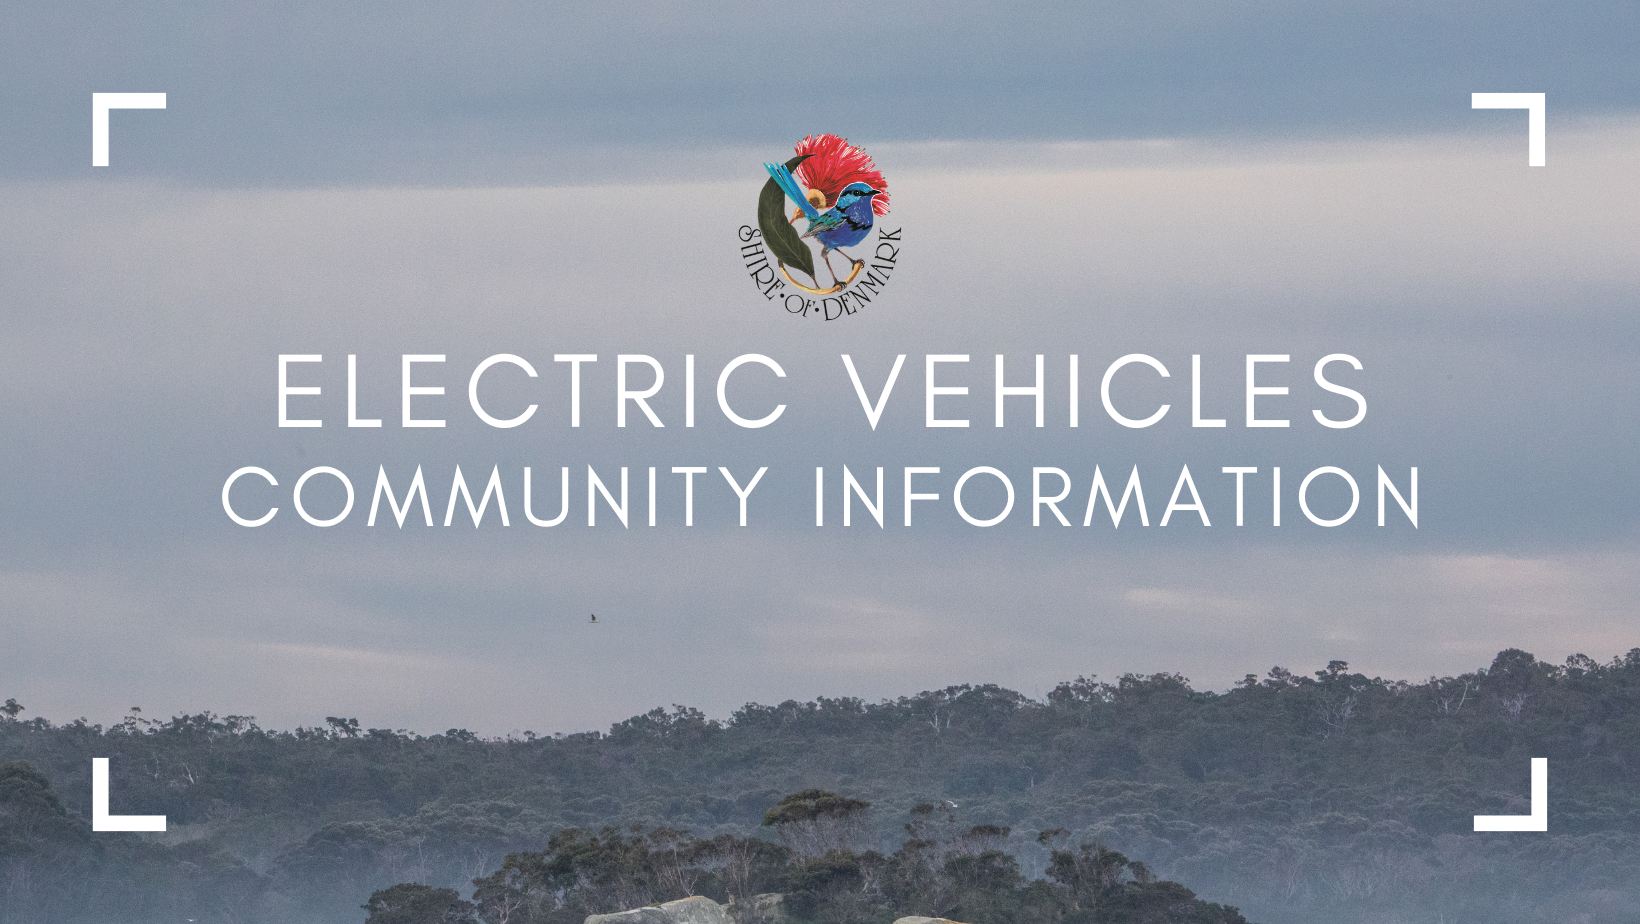 Community Information Sheet for Electric Vehicles